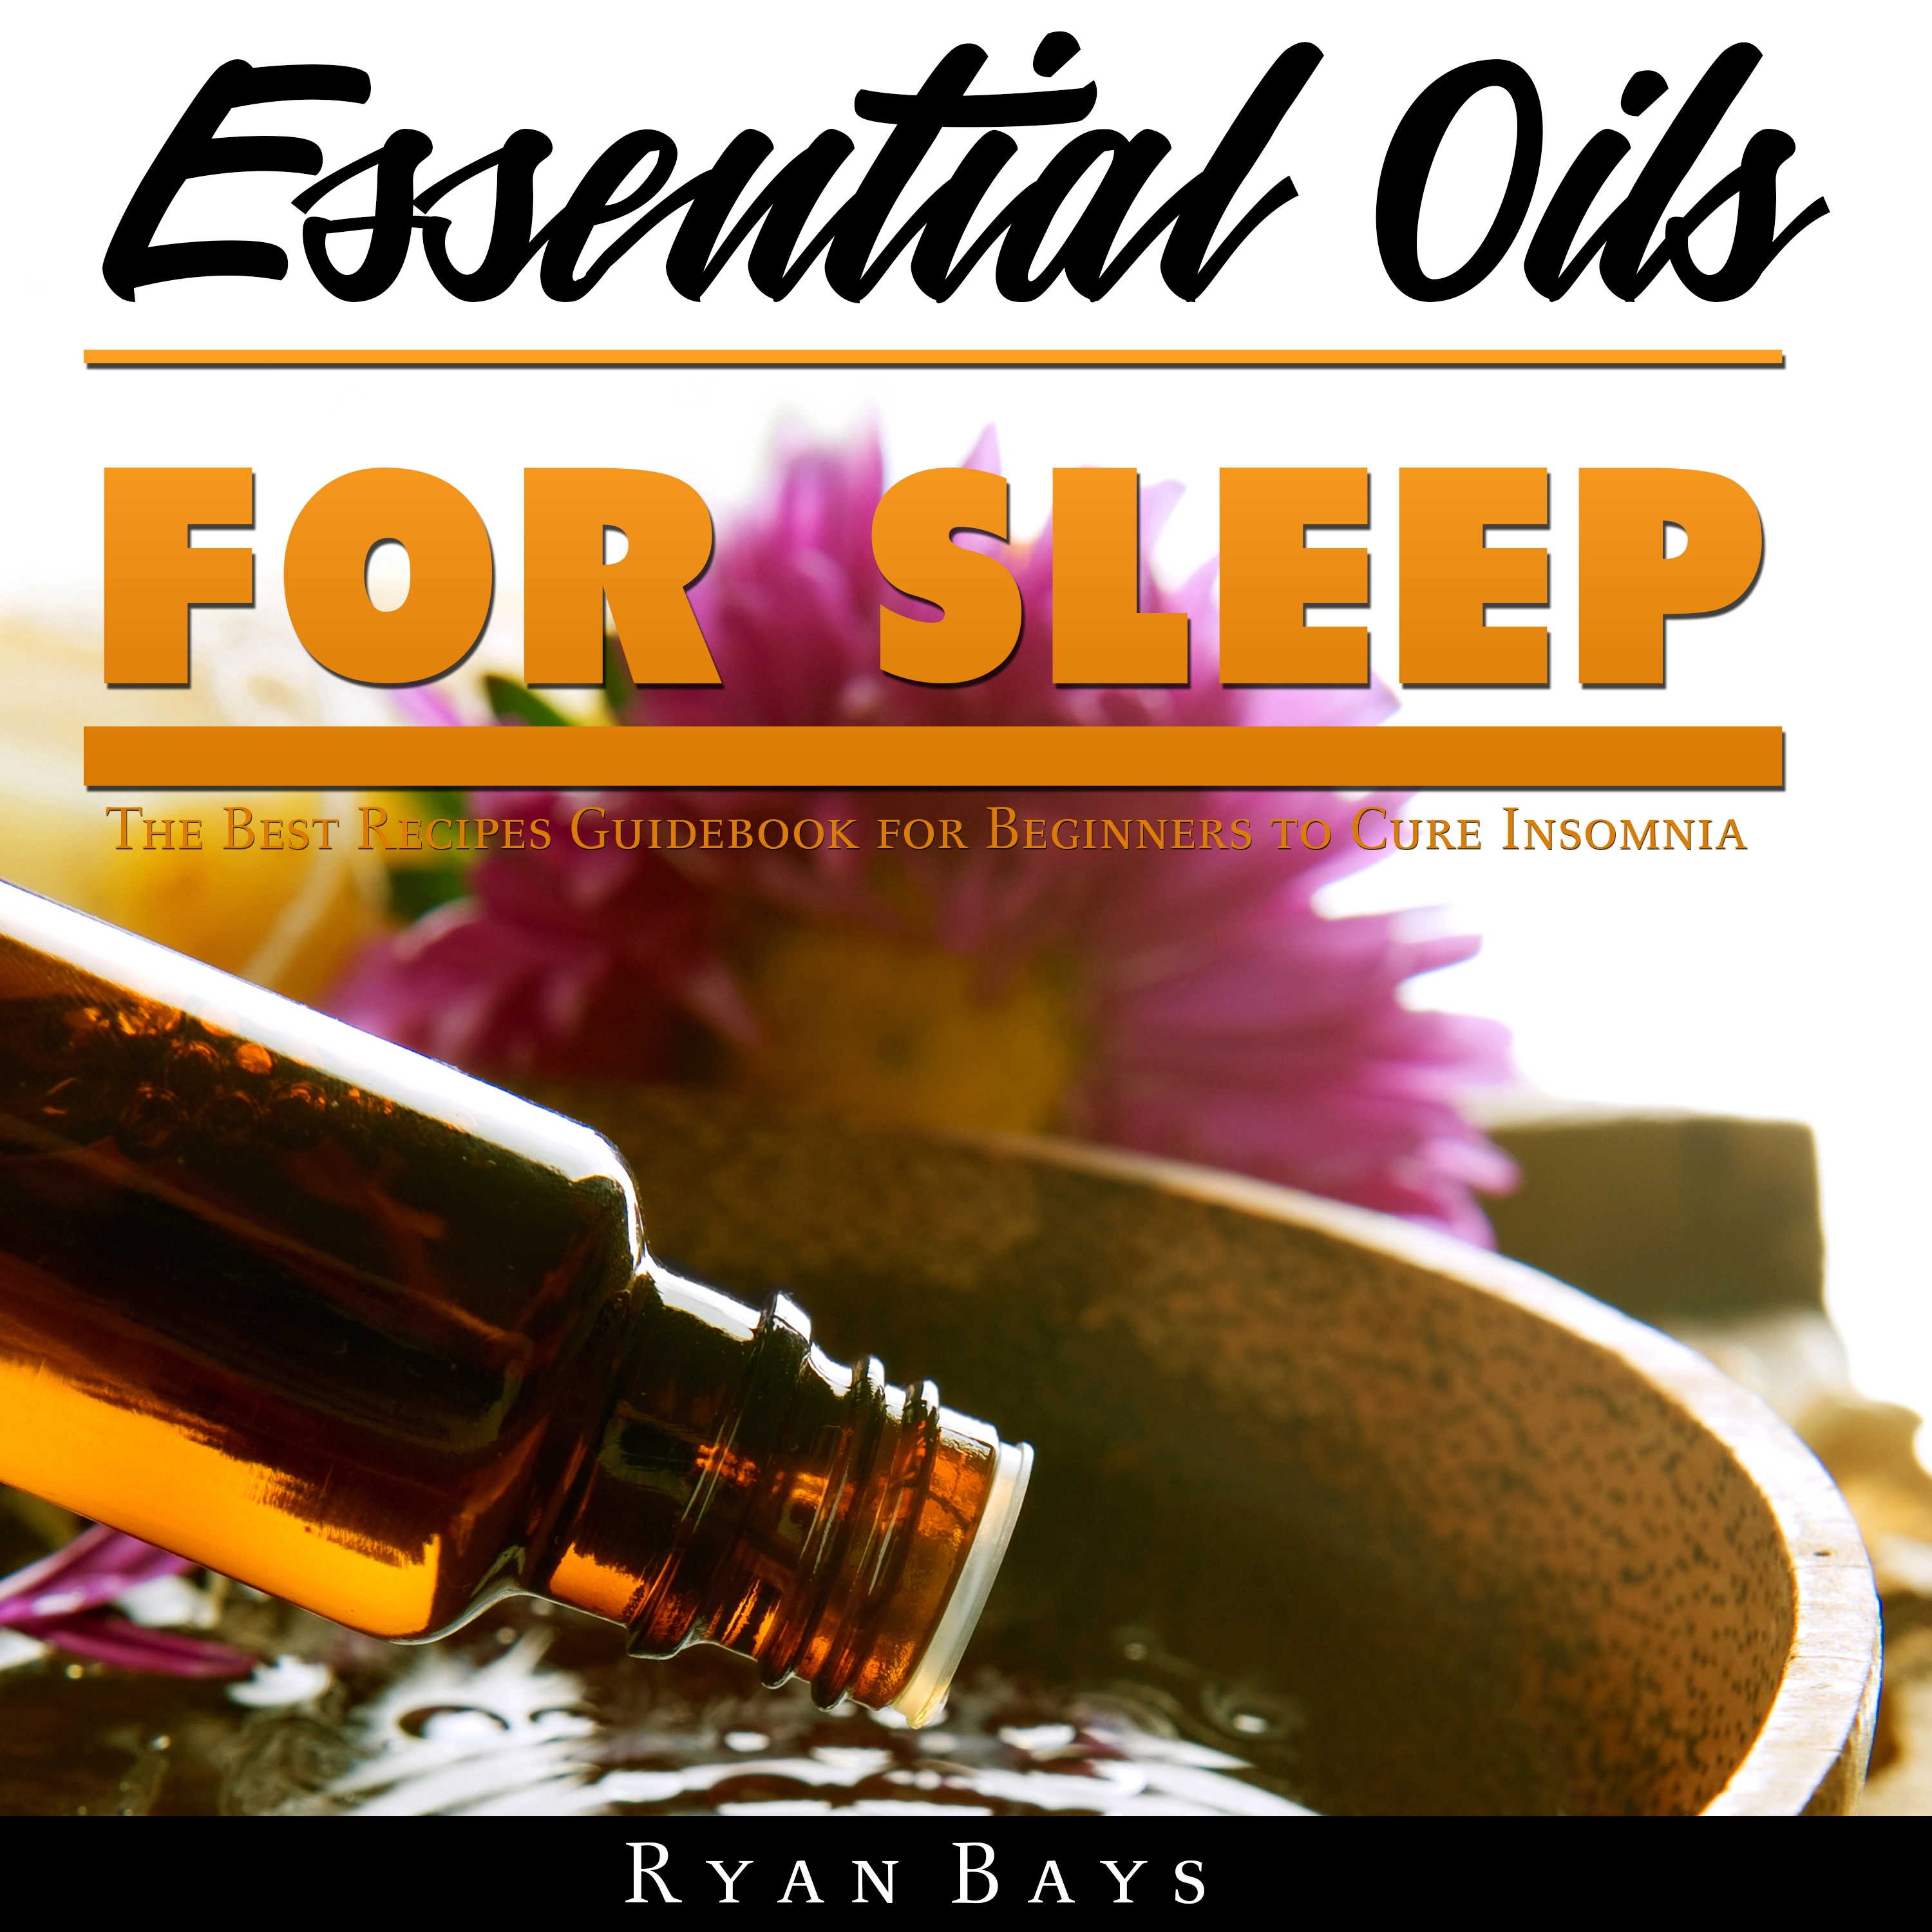 Essential Oils for Sleep: The Best Recipes Guidebook for Beginners to Cure Insomnia by Ryan Bays